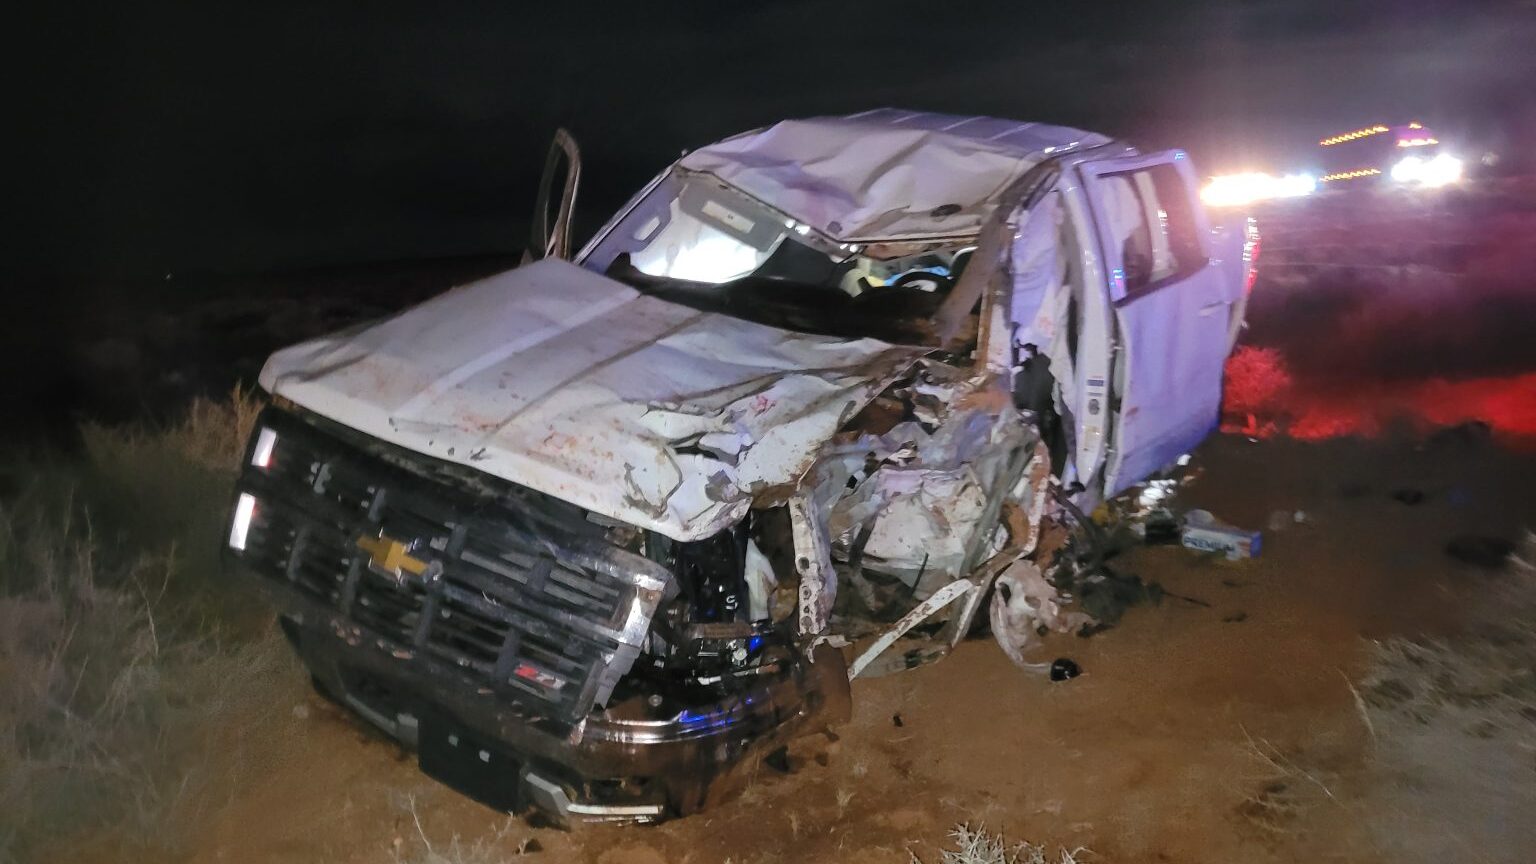 The Utah Department of Public Safety said the San Juan County crash happened around 8:30 p.m. The a...